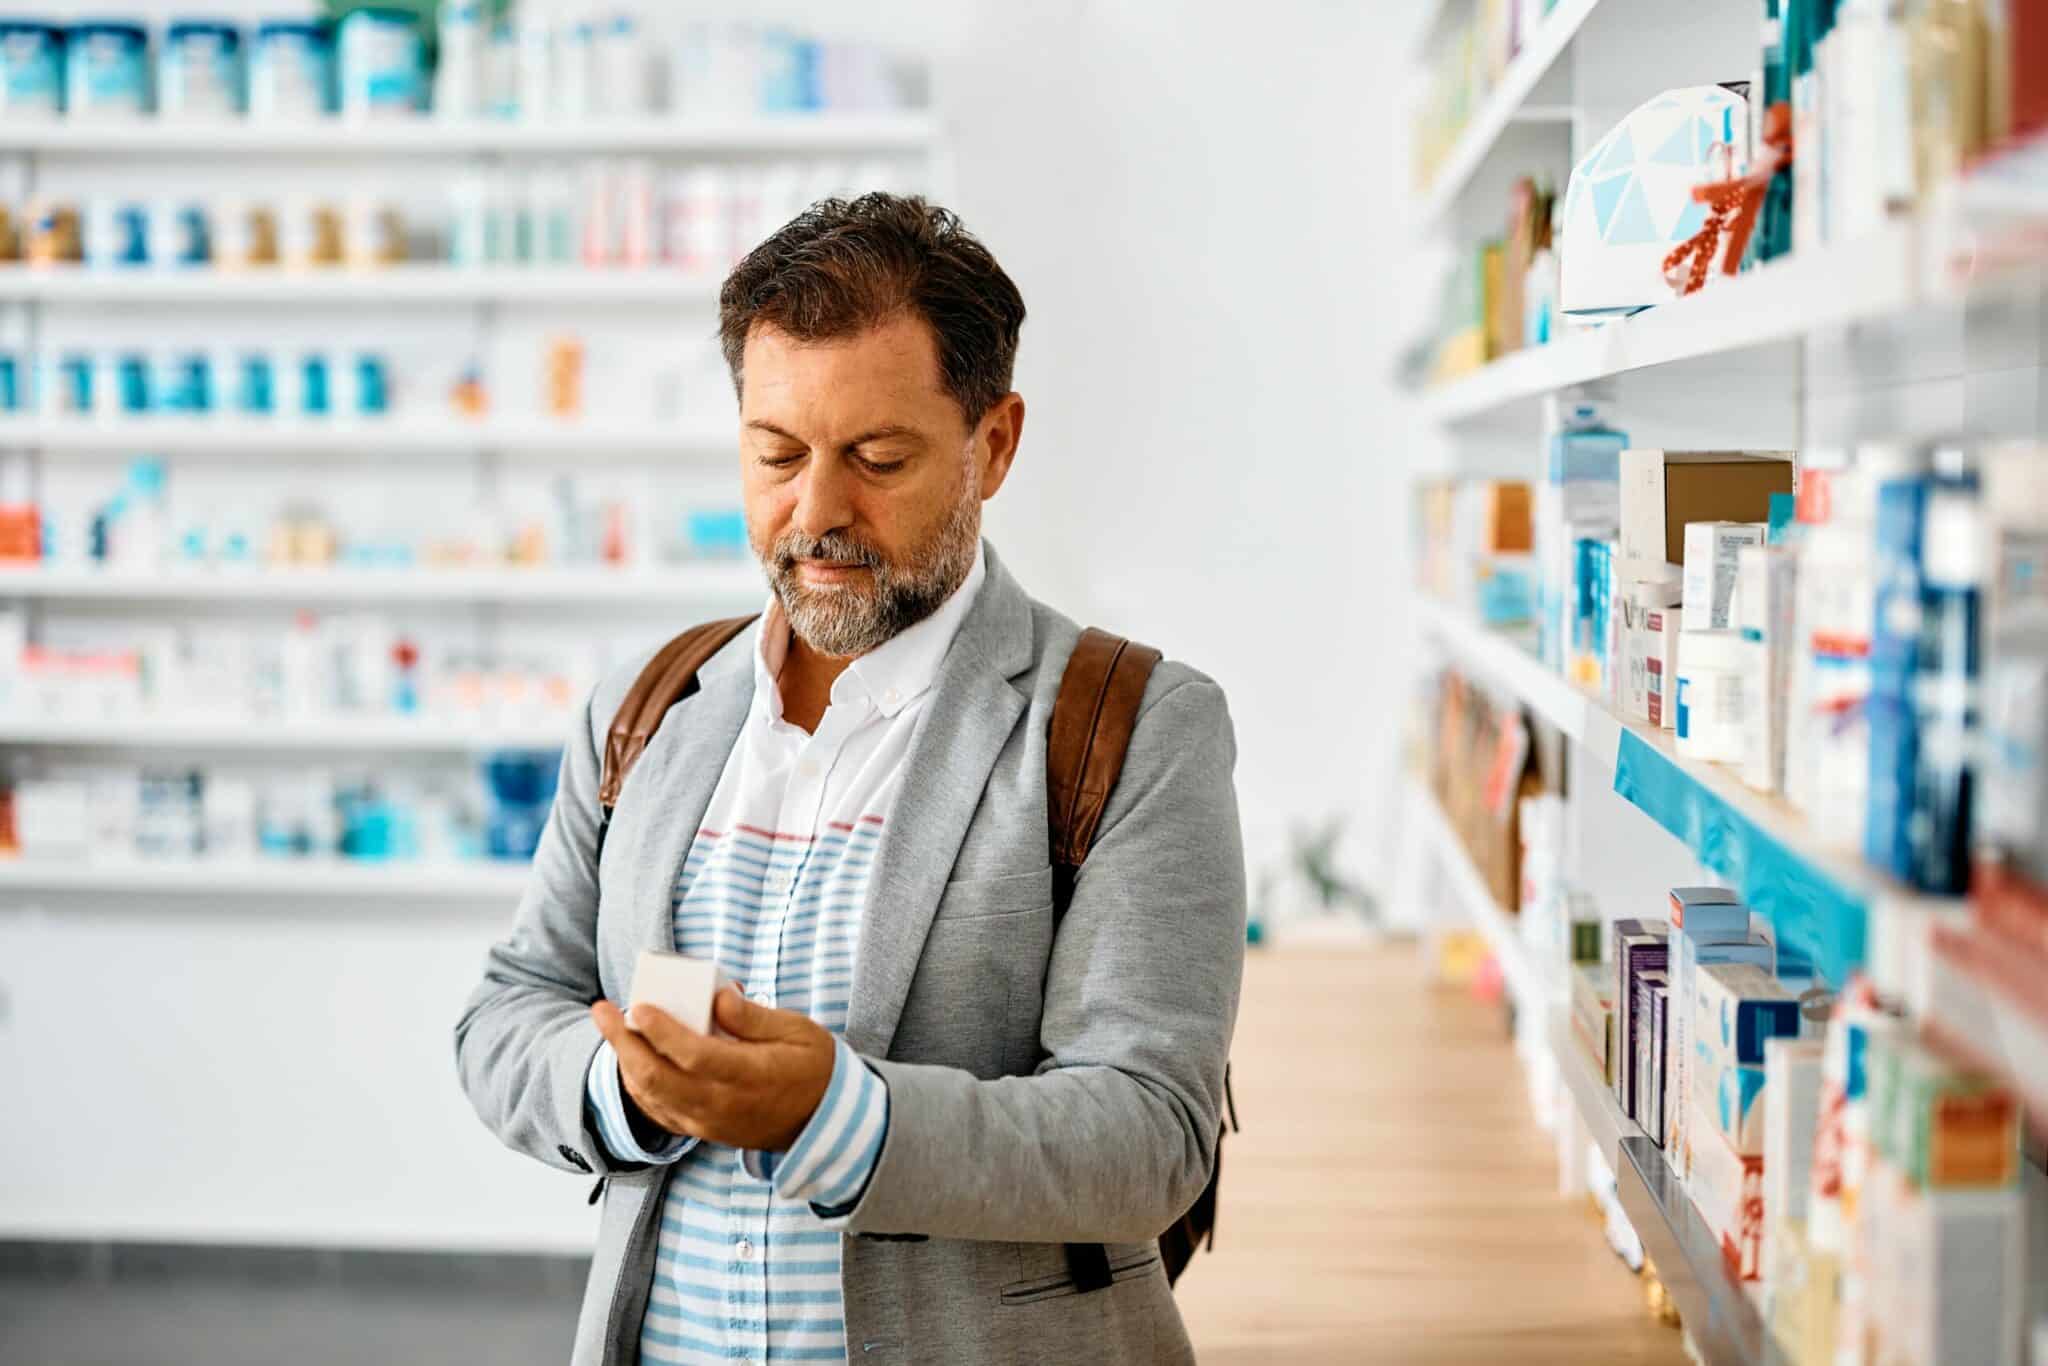 middle-aged-man-buying-medicine-in-a-pharmacy-2023-02-15-23-20-53-utc-min